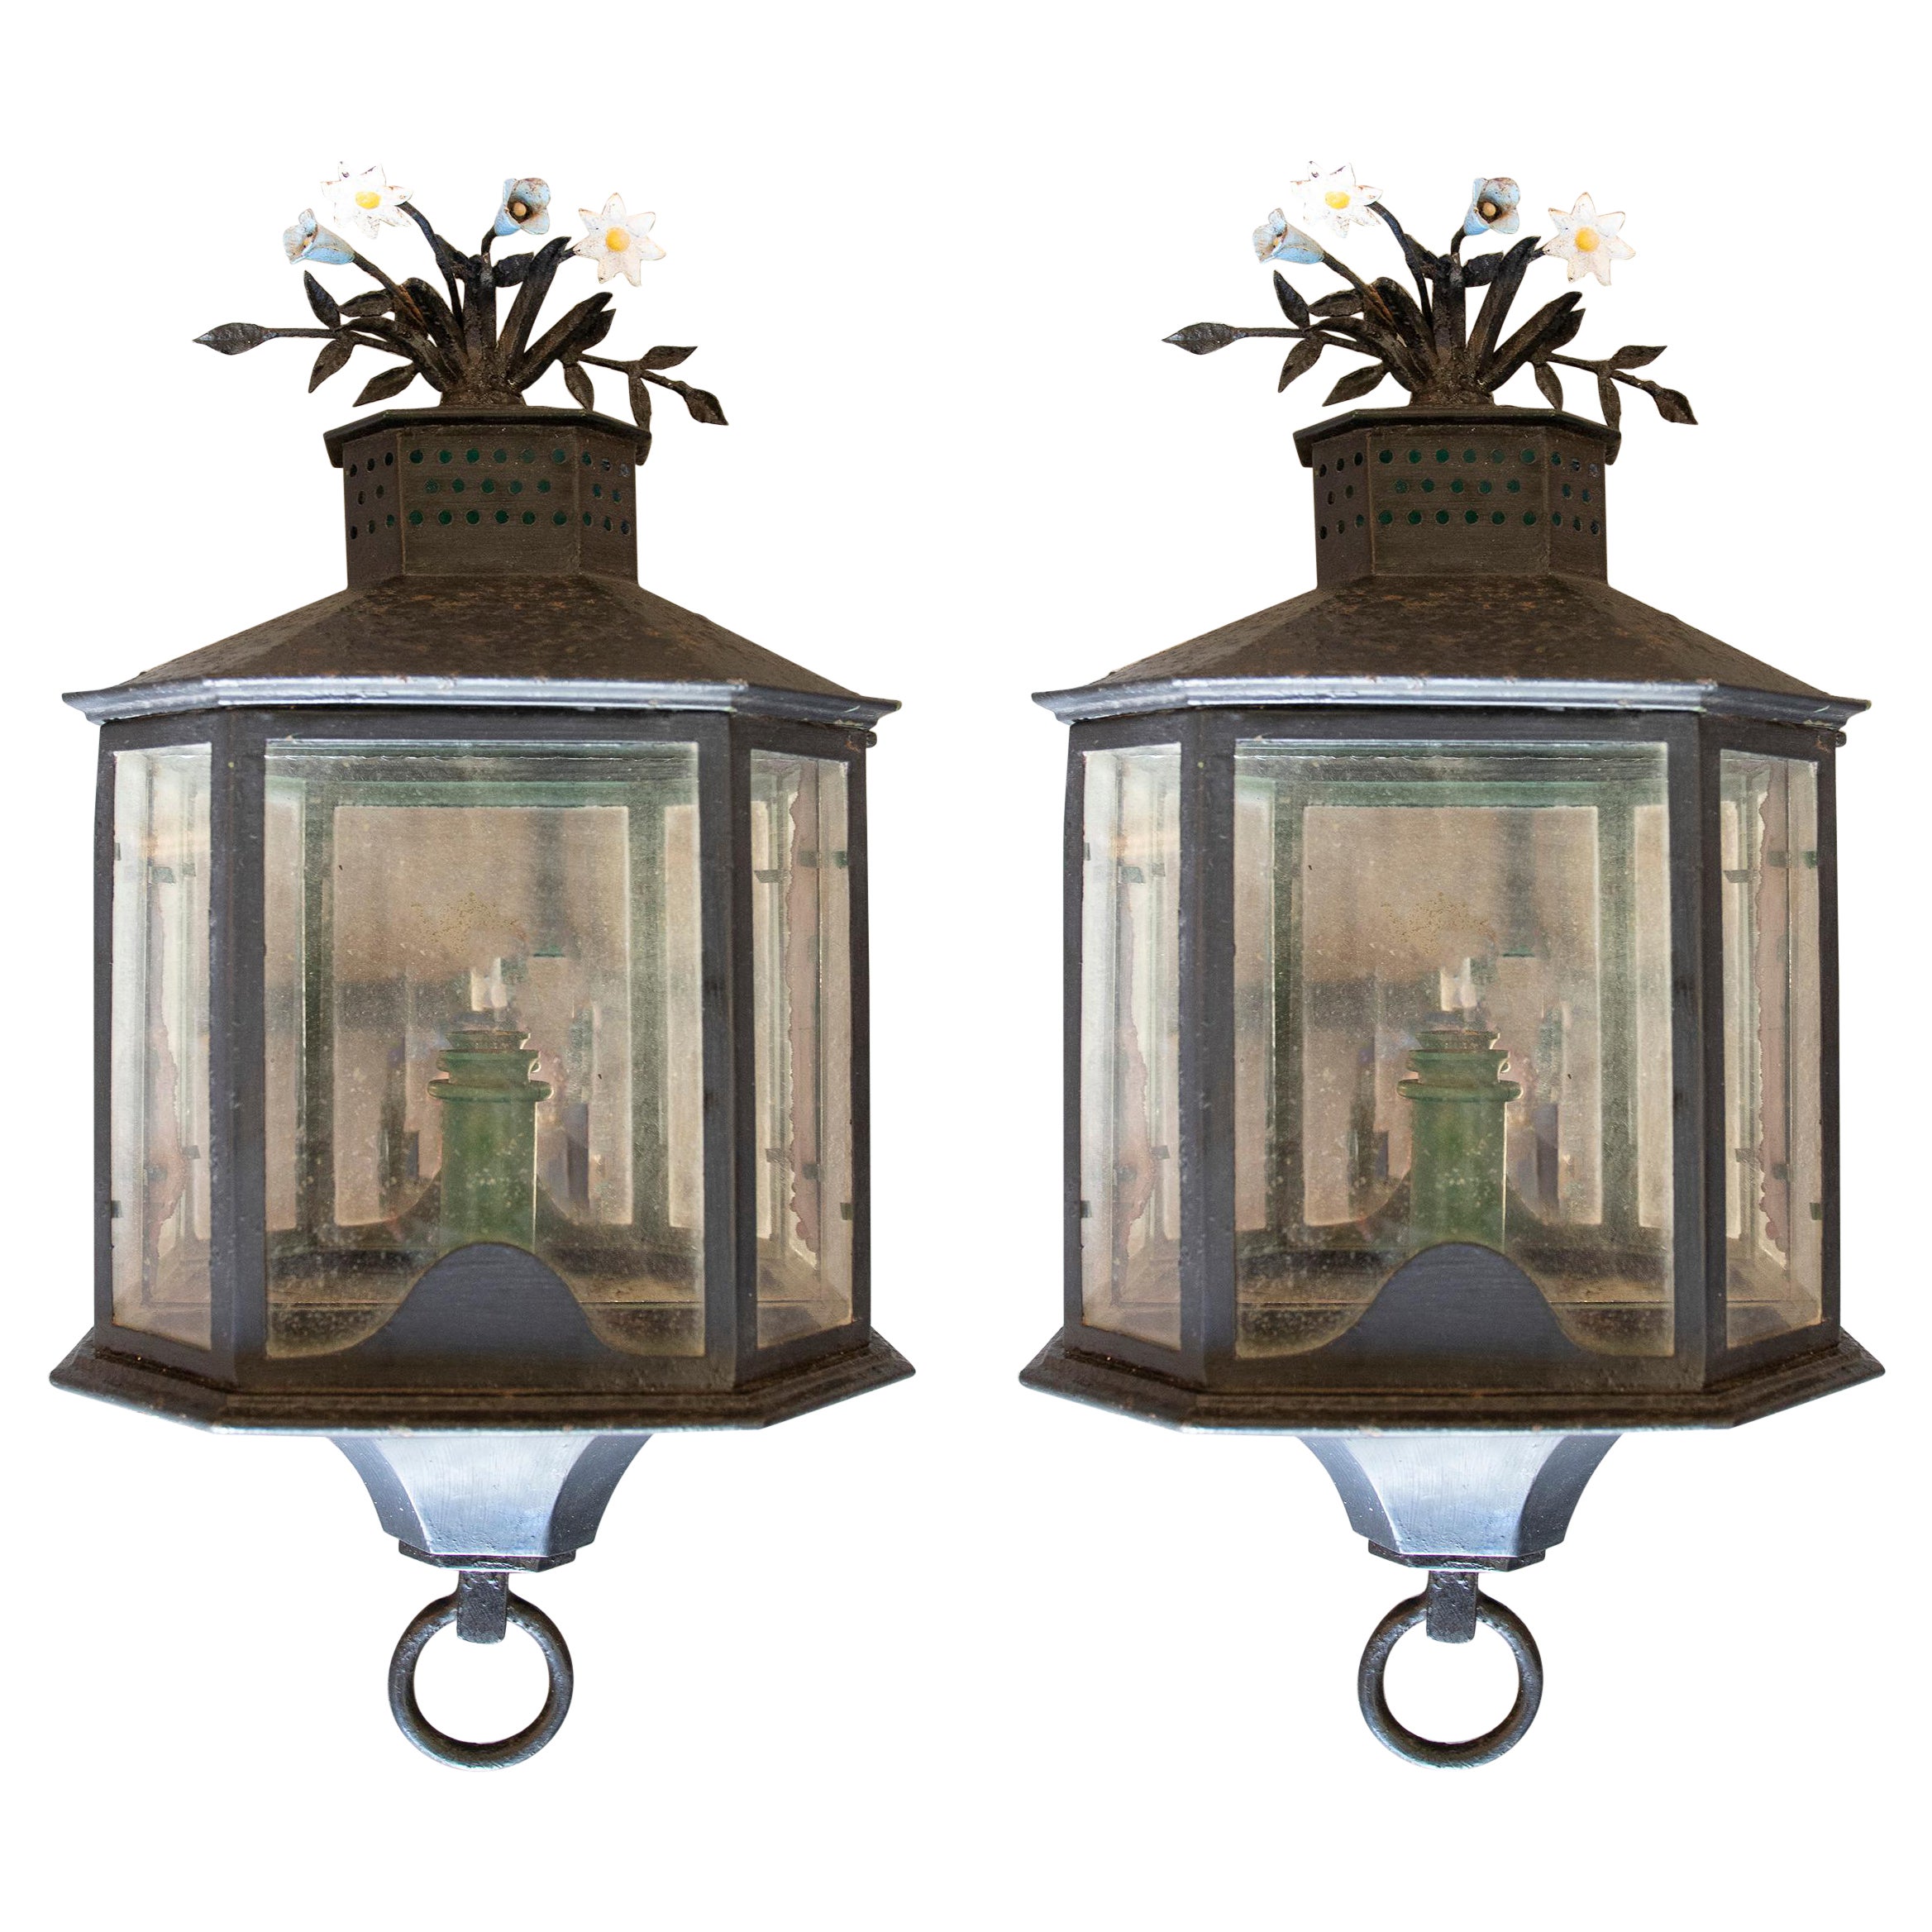 Pair of 1970s Spanish Iron Wall Lantern Lamps w/ Flower Decorations